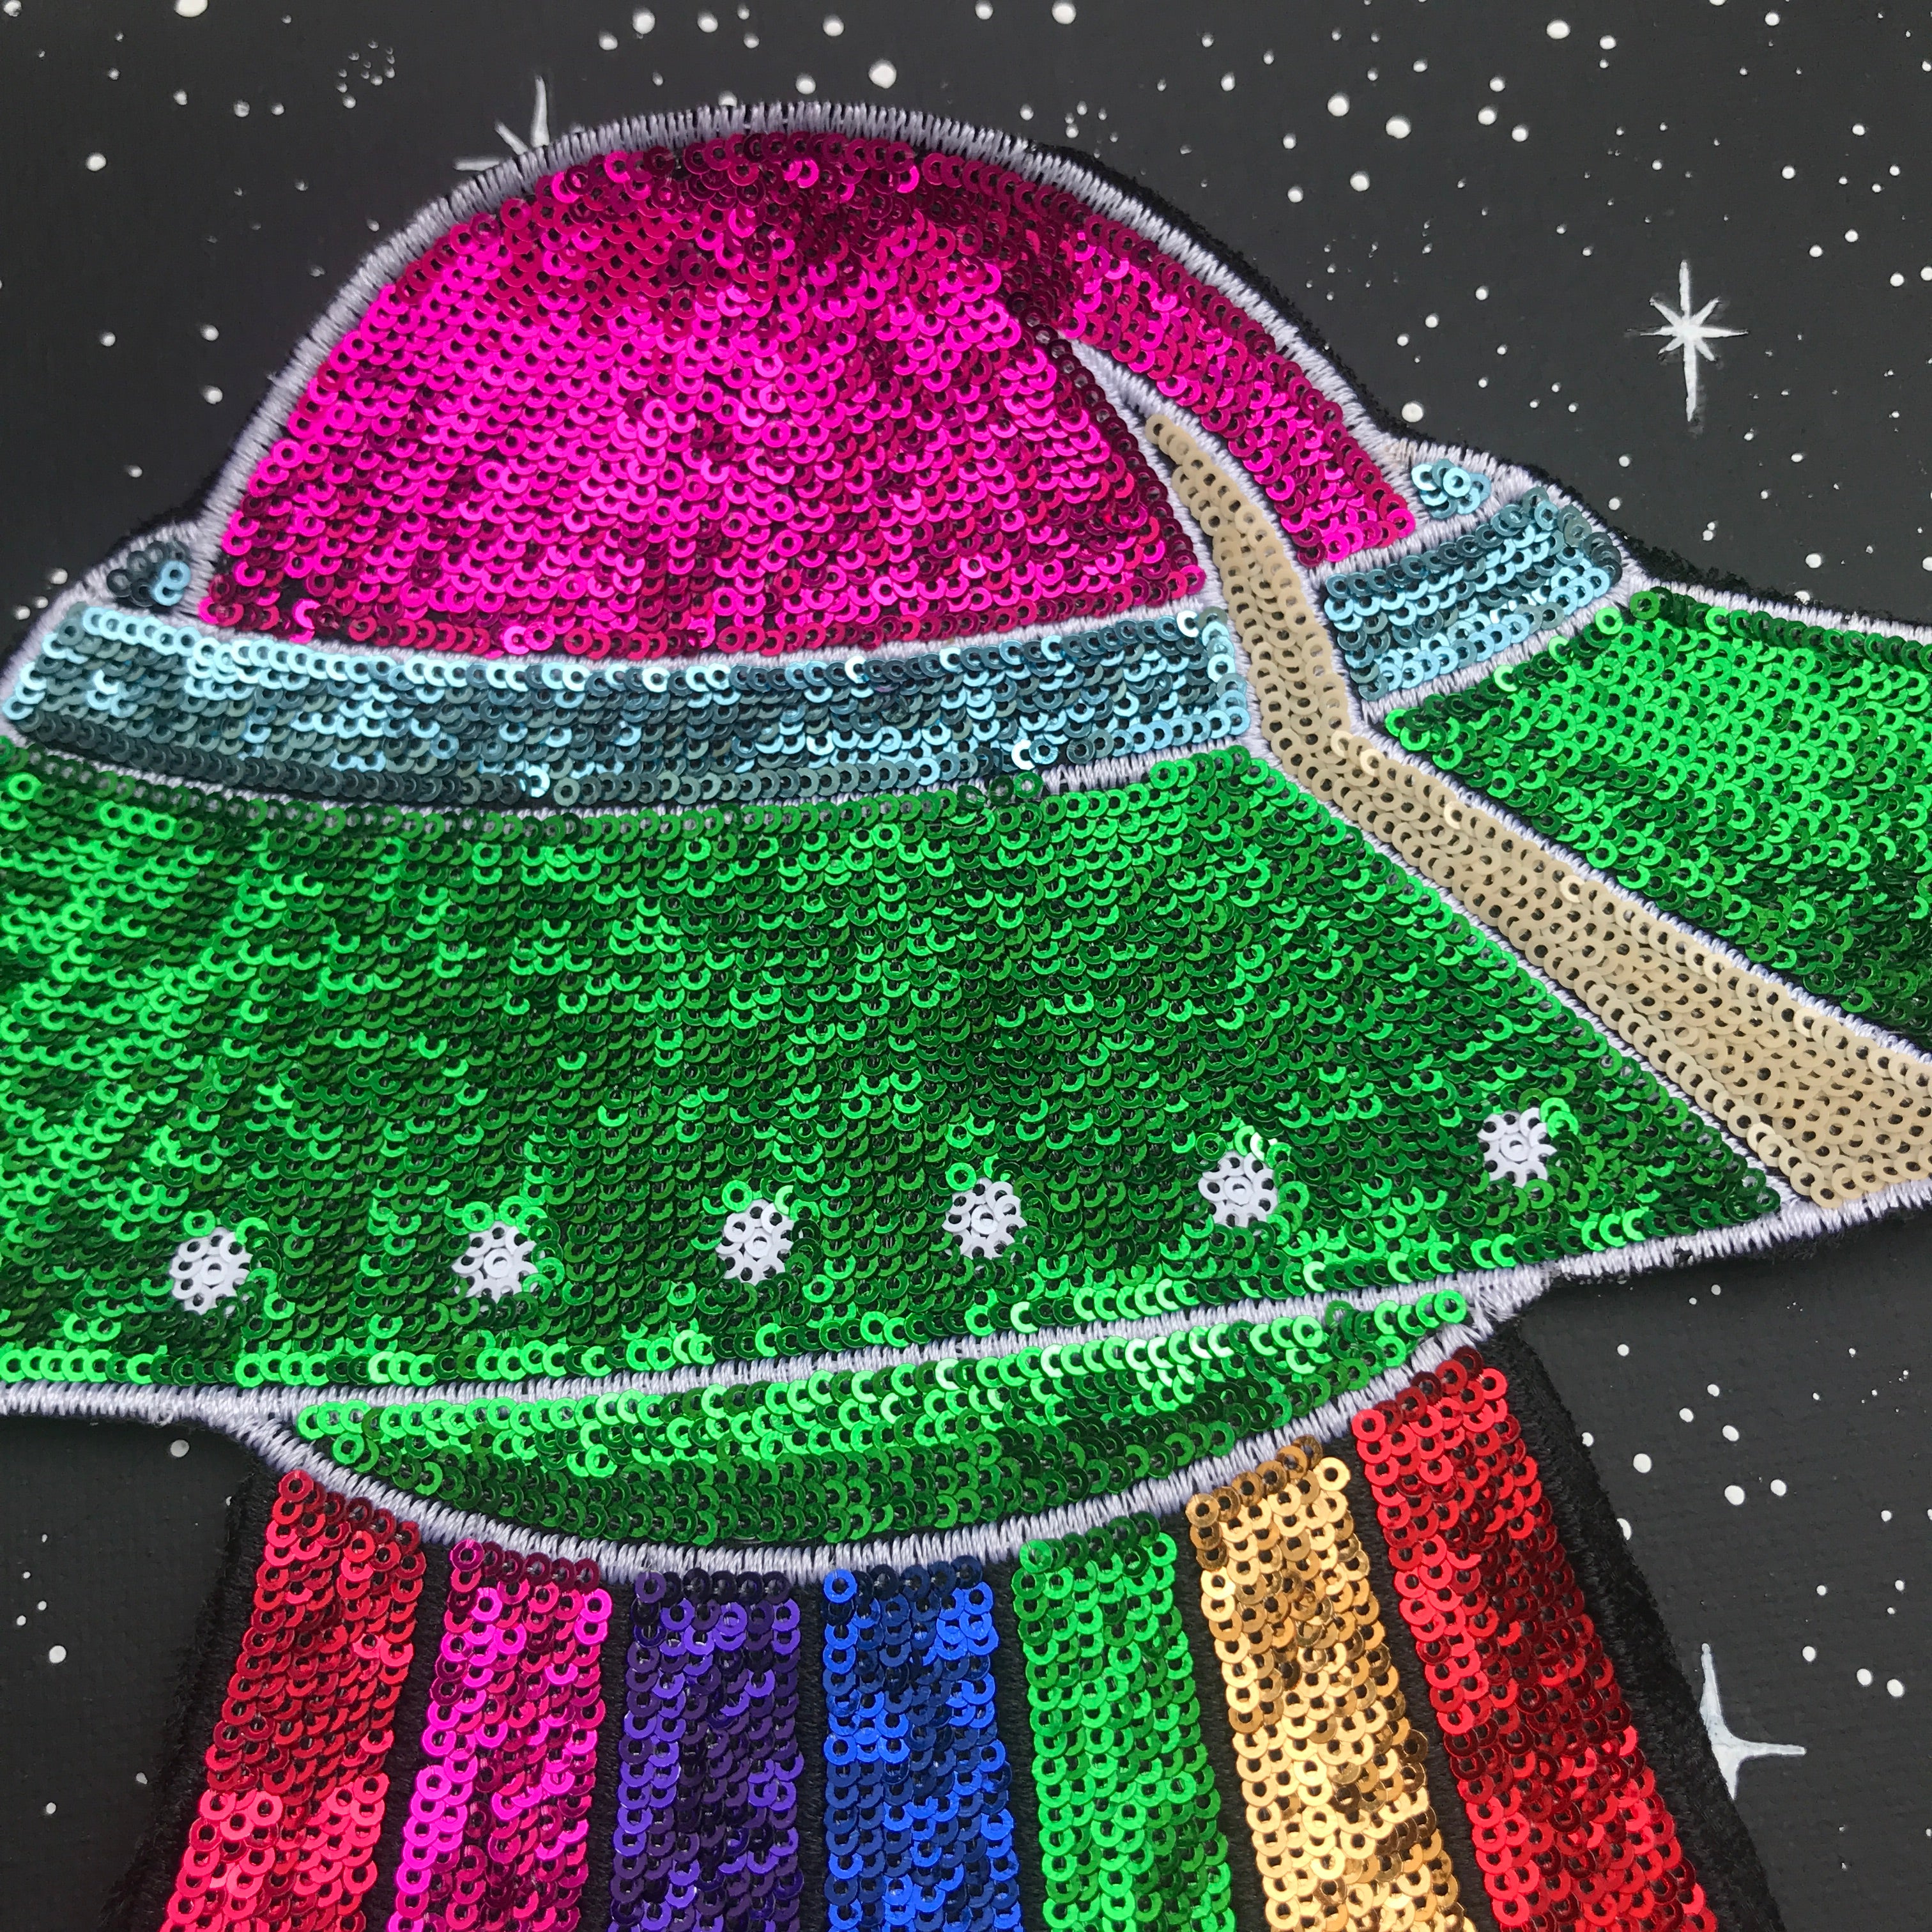 Roswell UFO large sequined Patch